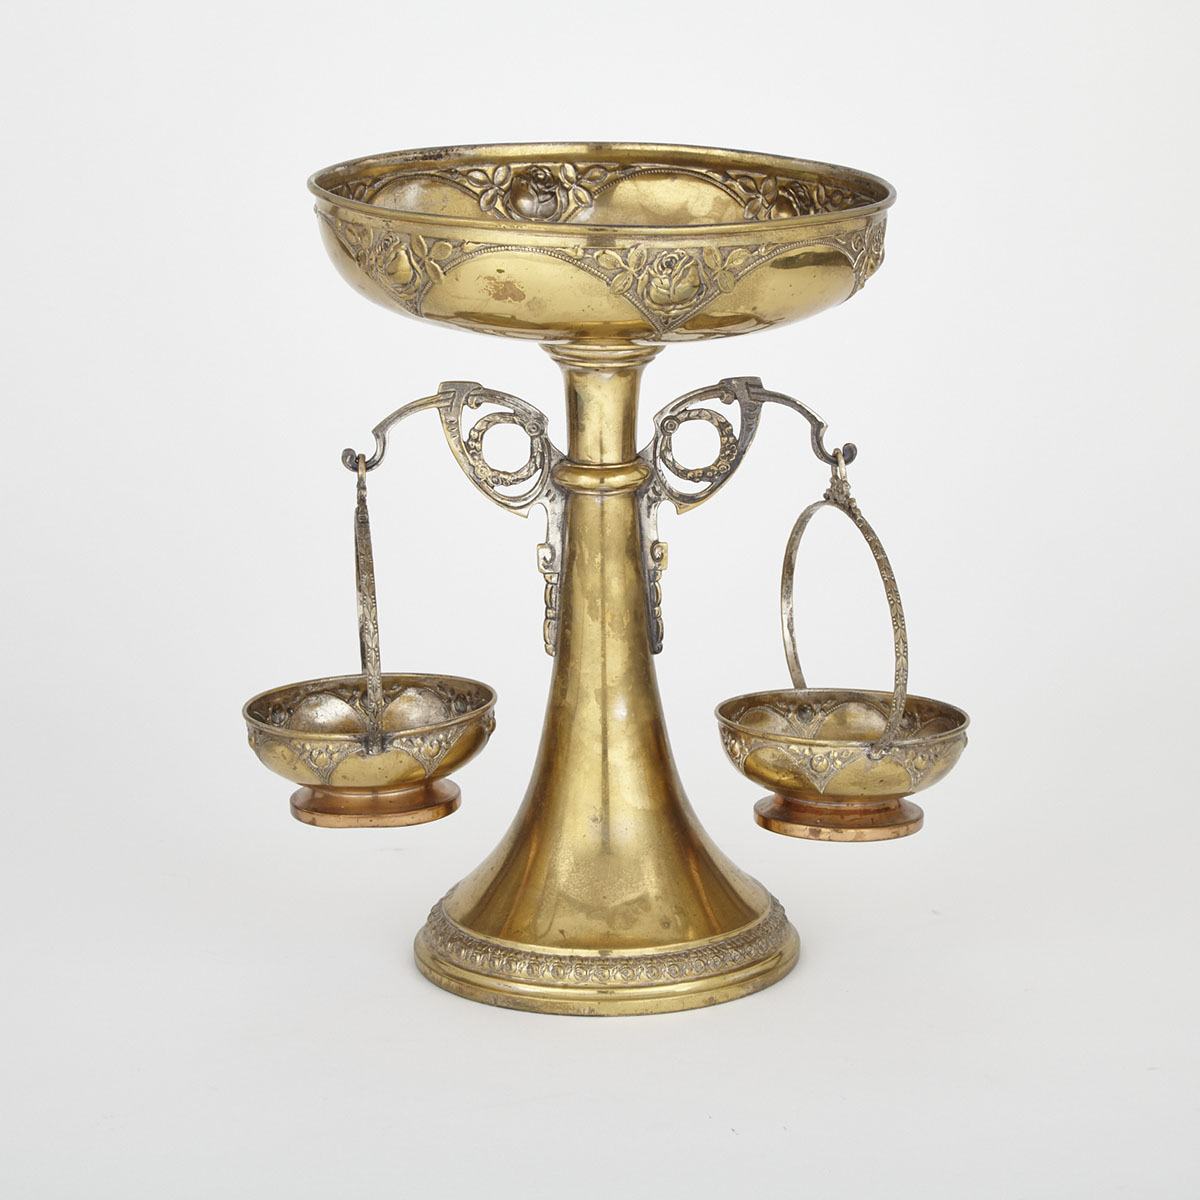 Three Piece Austrian Secessionist Silvered and Polished Brass Table Centerpiece Compot, c.1900